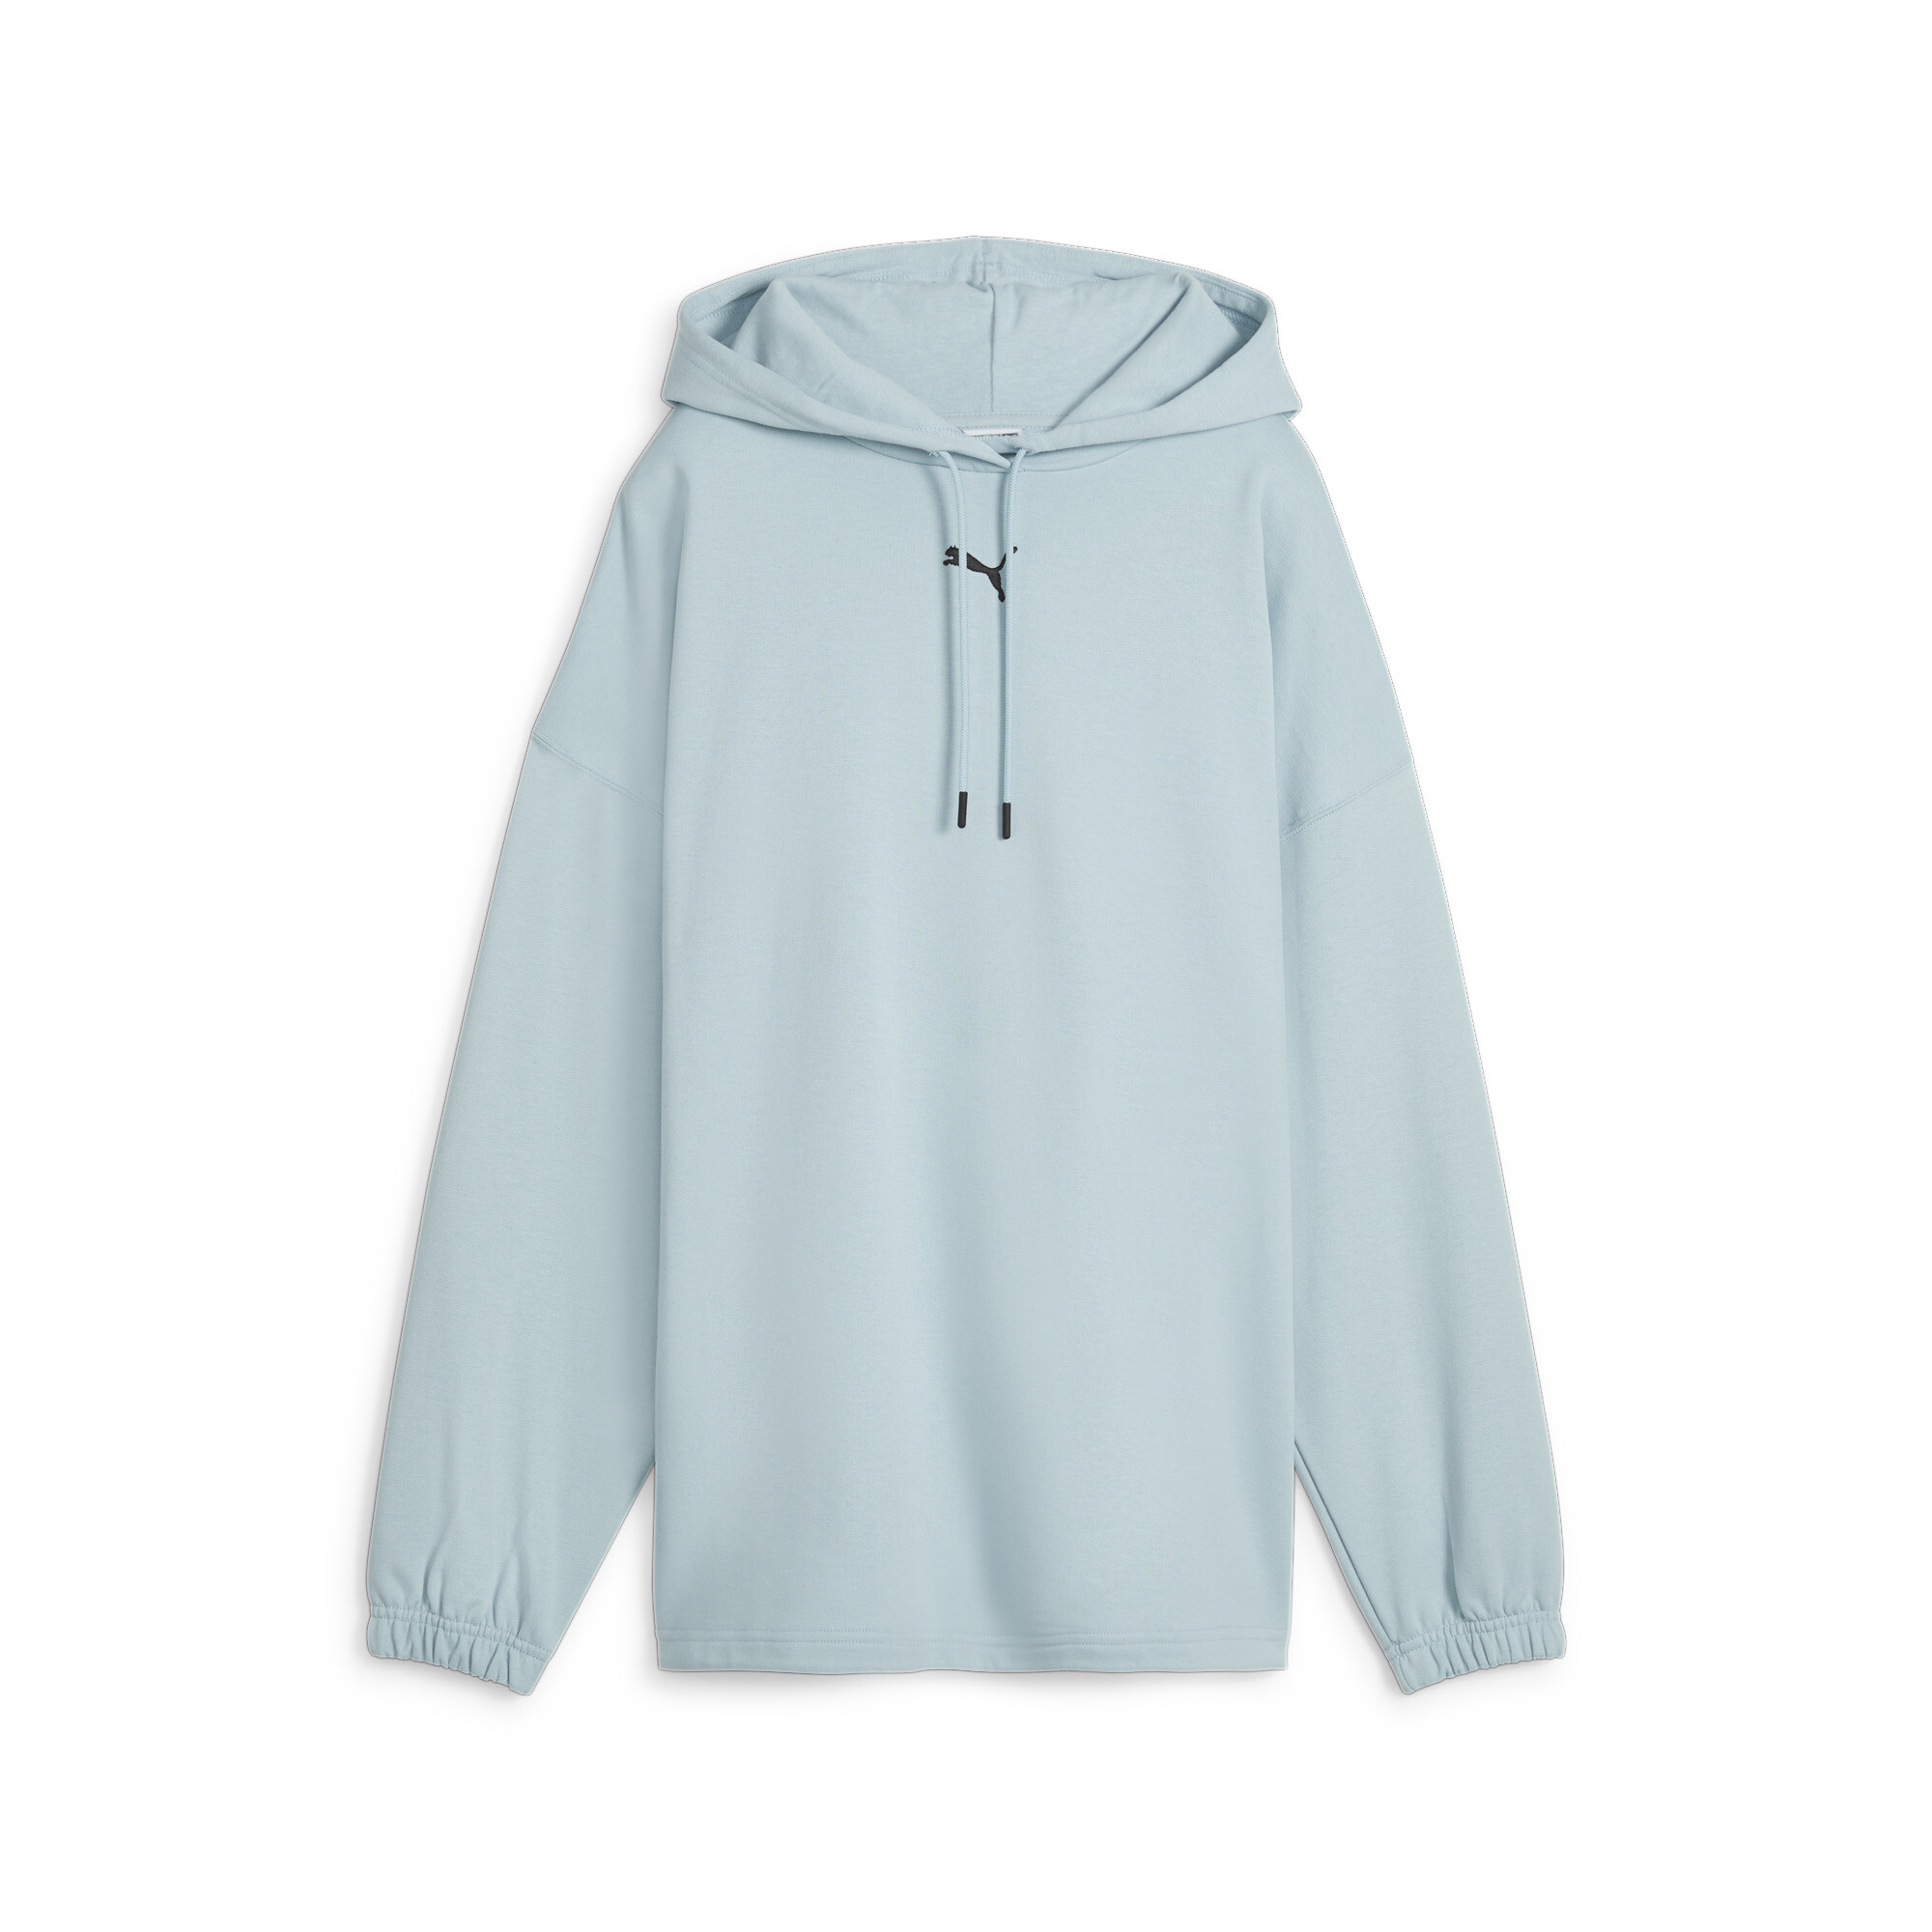 Women's PUMA DARE TO Oversized Hoodie In Blue, Size Small